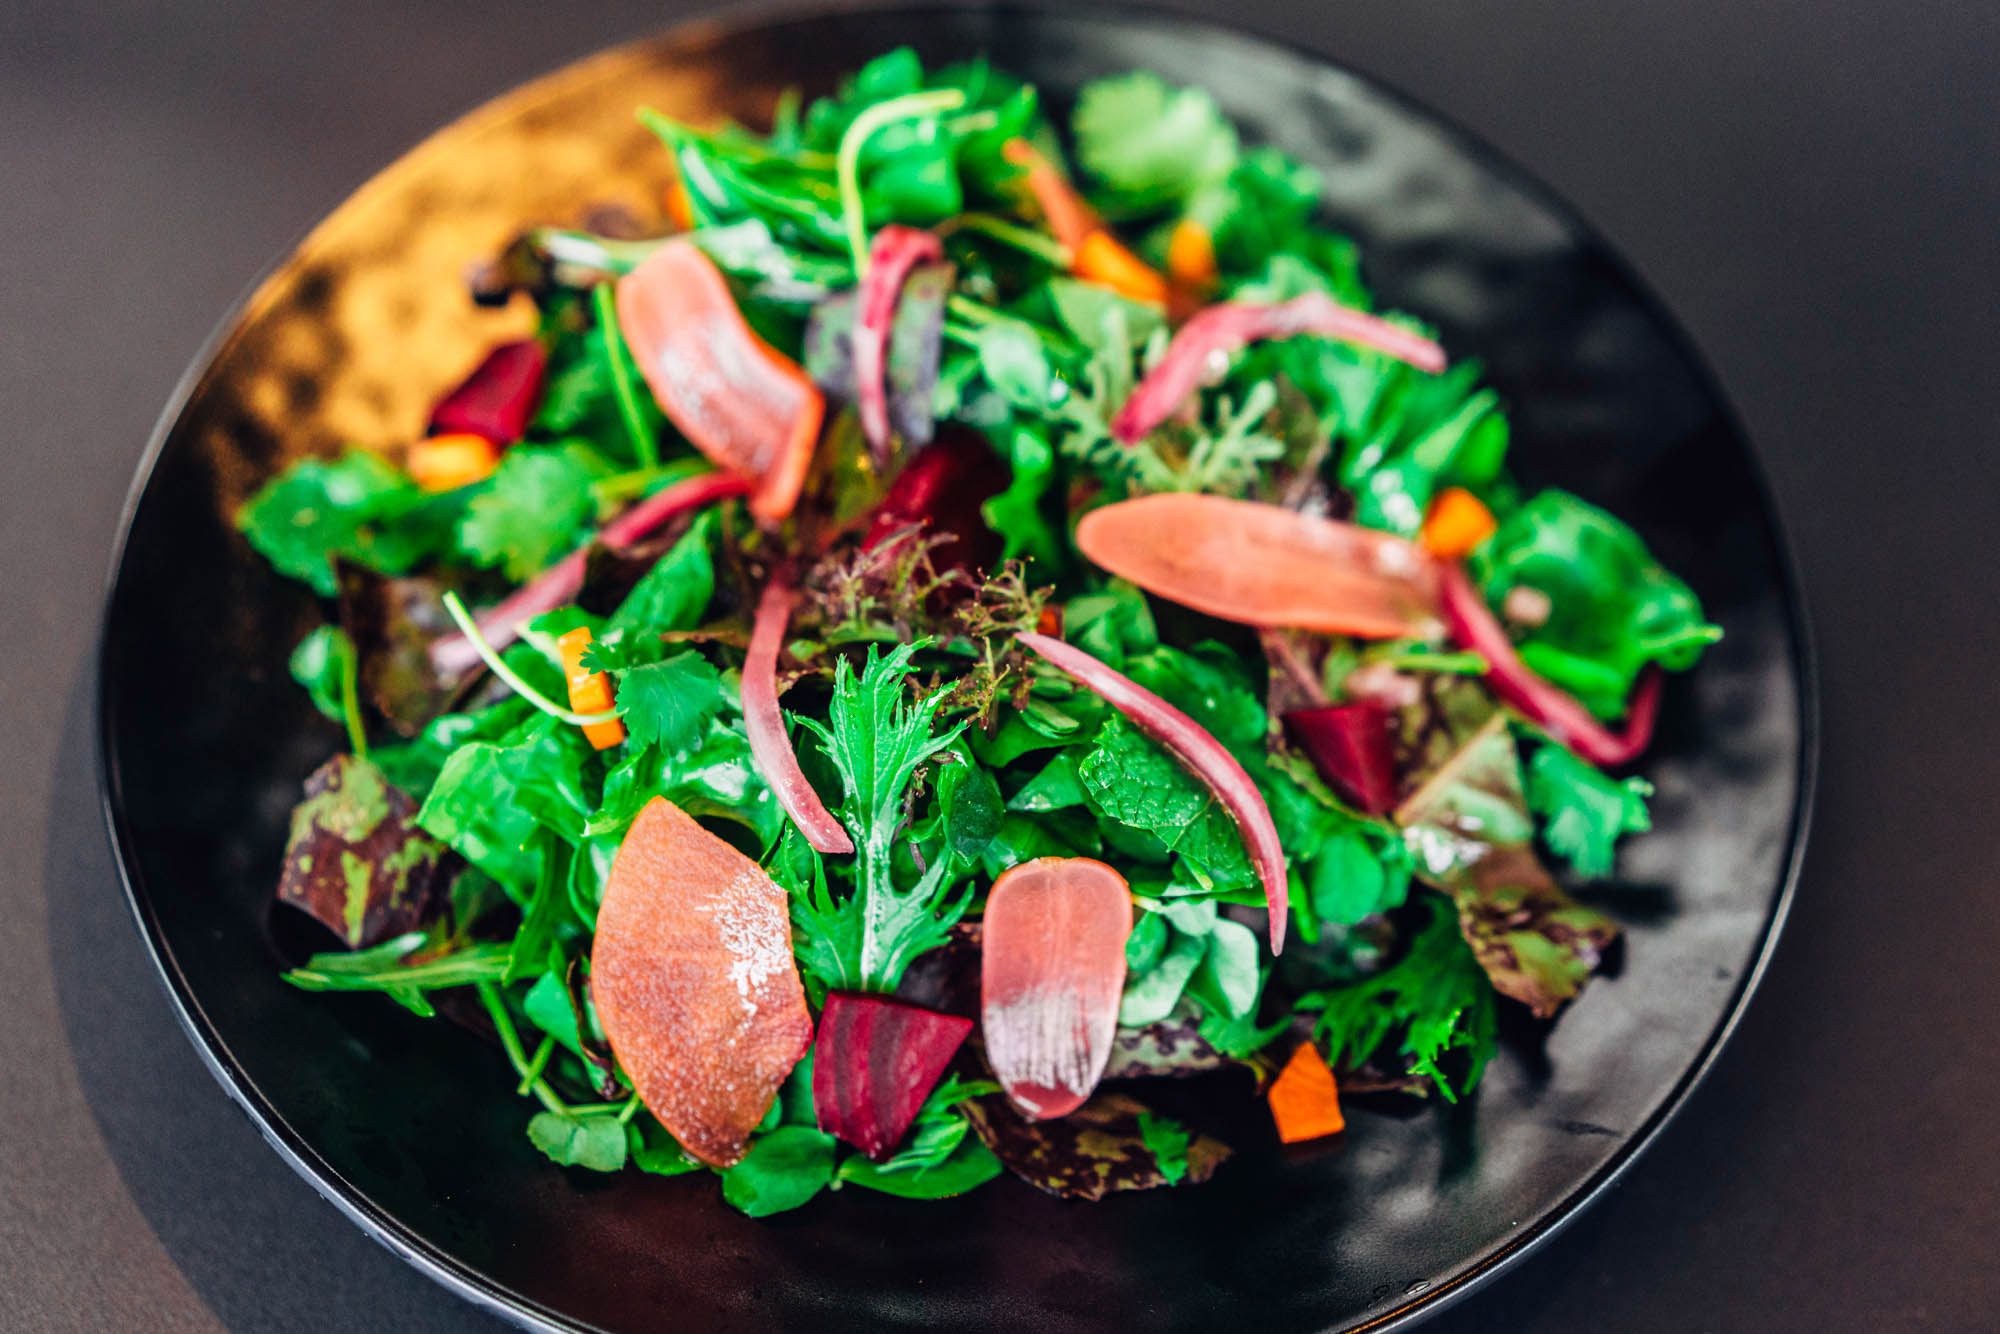 Helmed by chefs David Lee and Benjamin Goldman, the restaurant offers gorgeously executed and plated vegetarian fare in surroundings that will inspire you to stick to your healthy habits.